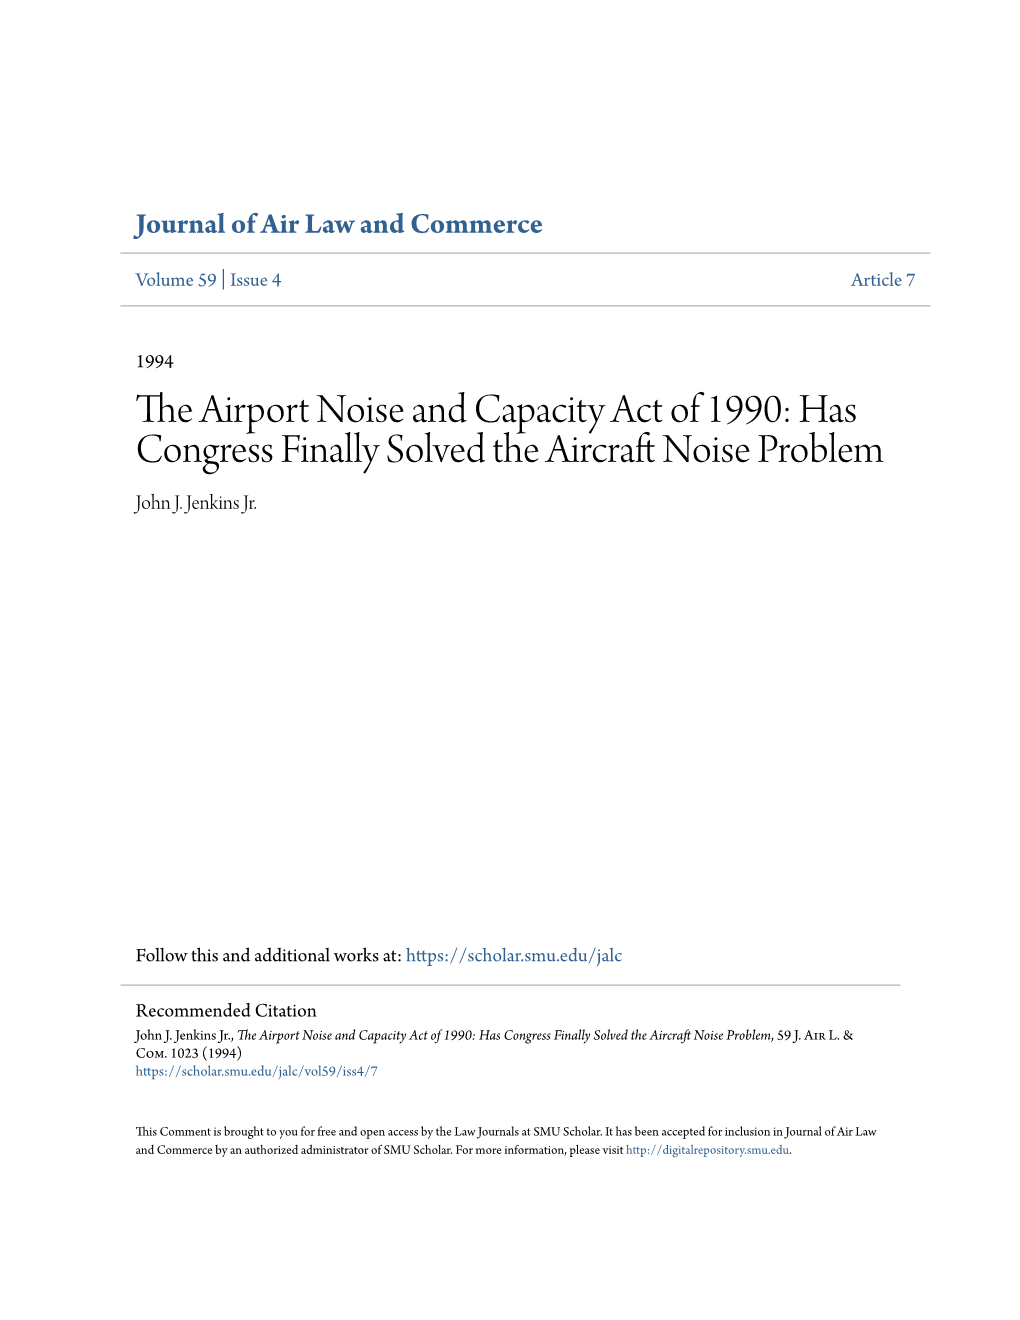 The Airport Noise and Capacity Act of 1990: Has Congress Finally Solved the Aircraft Noise Problem?